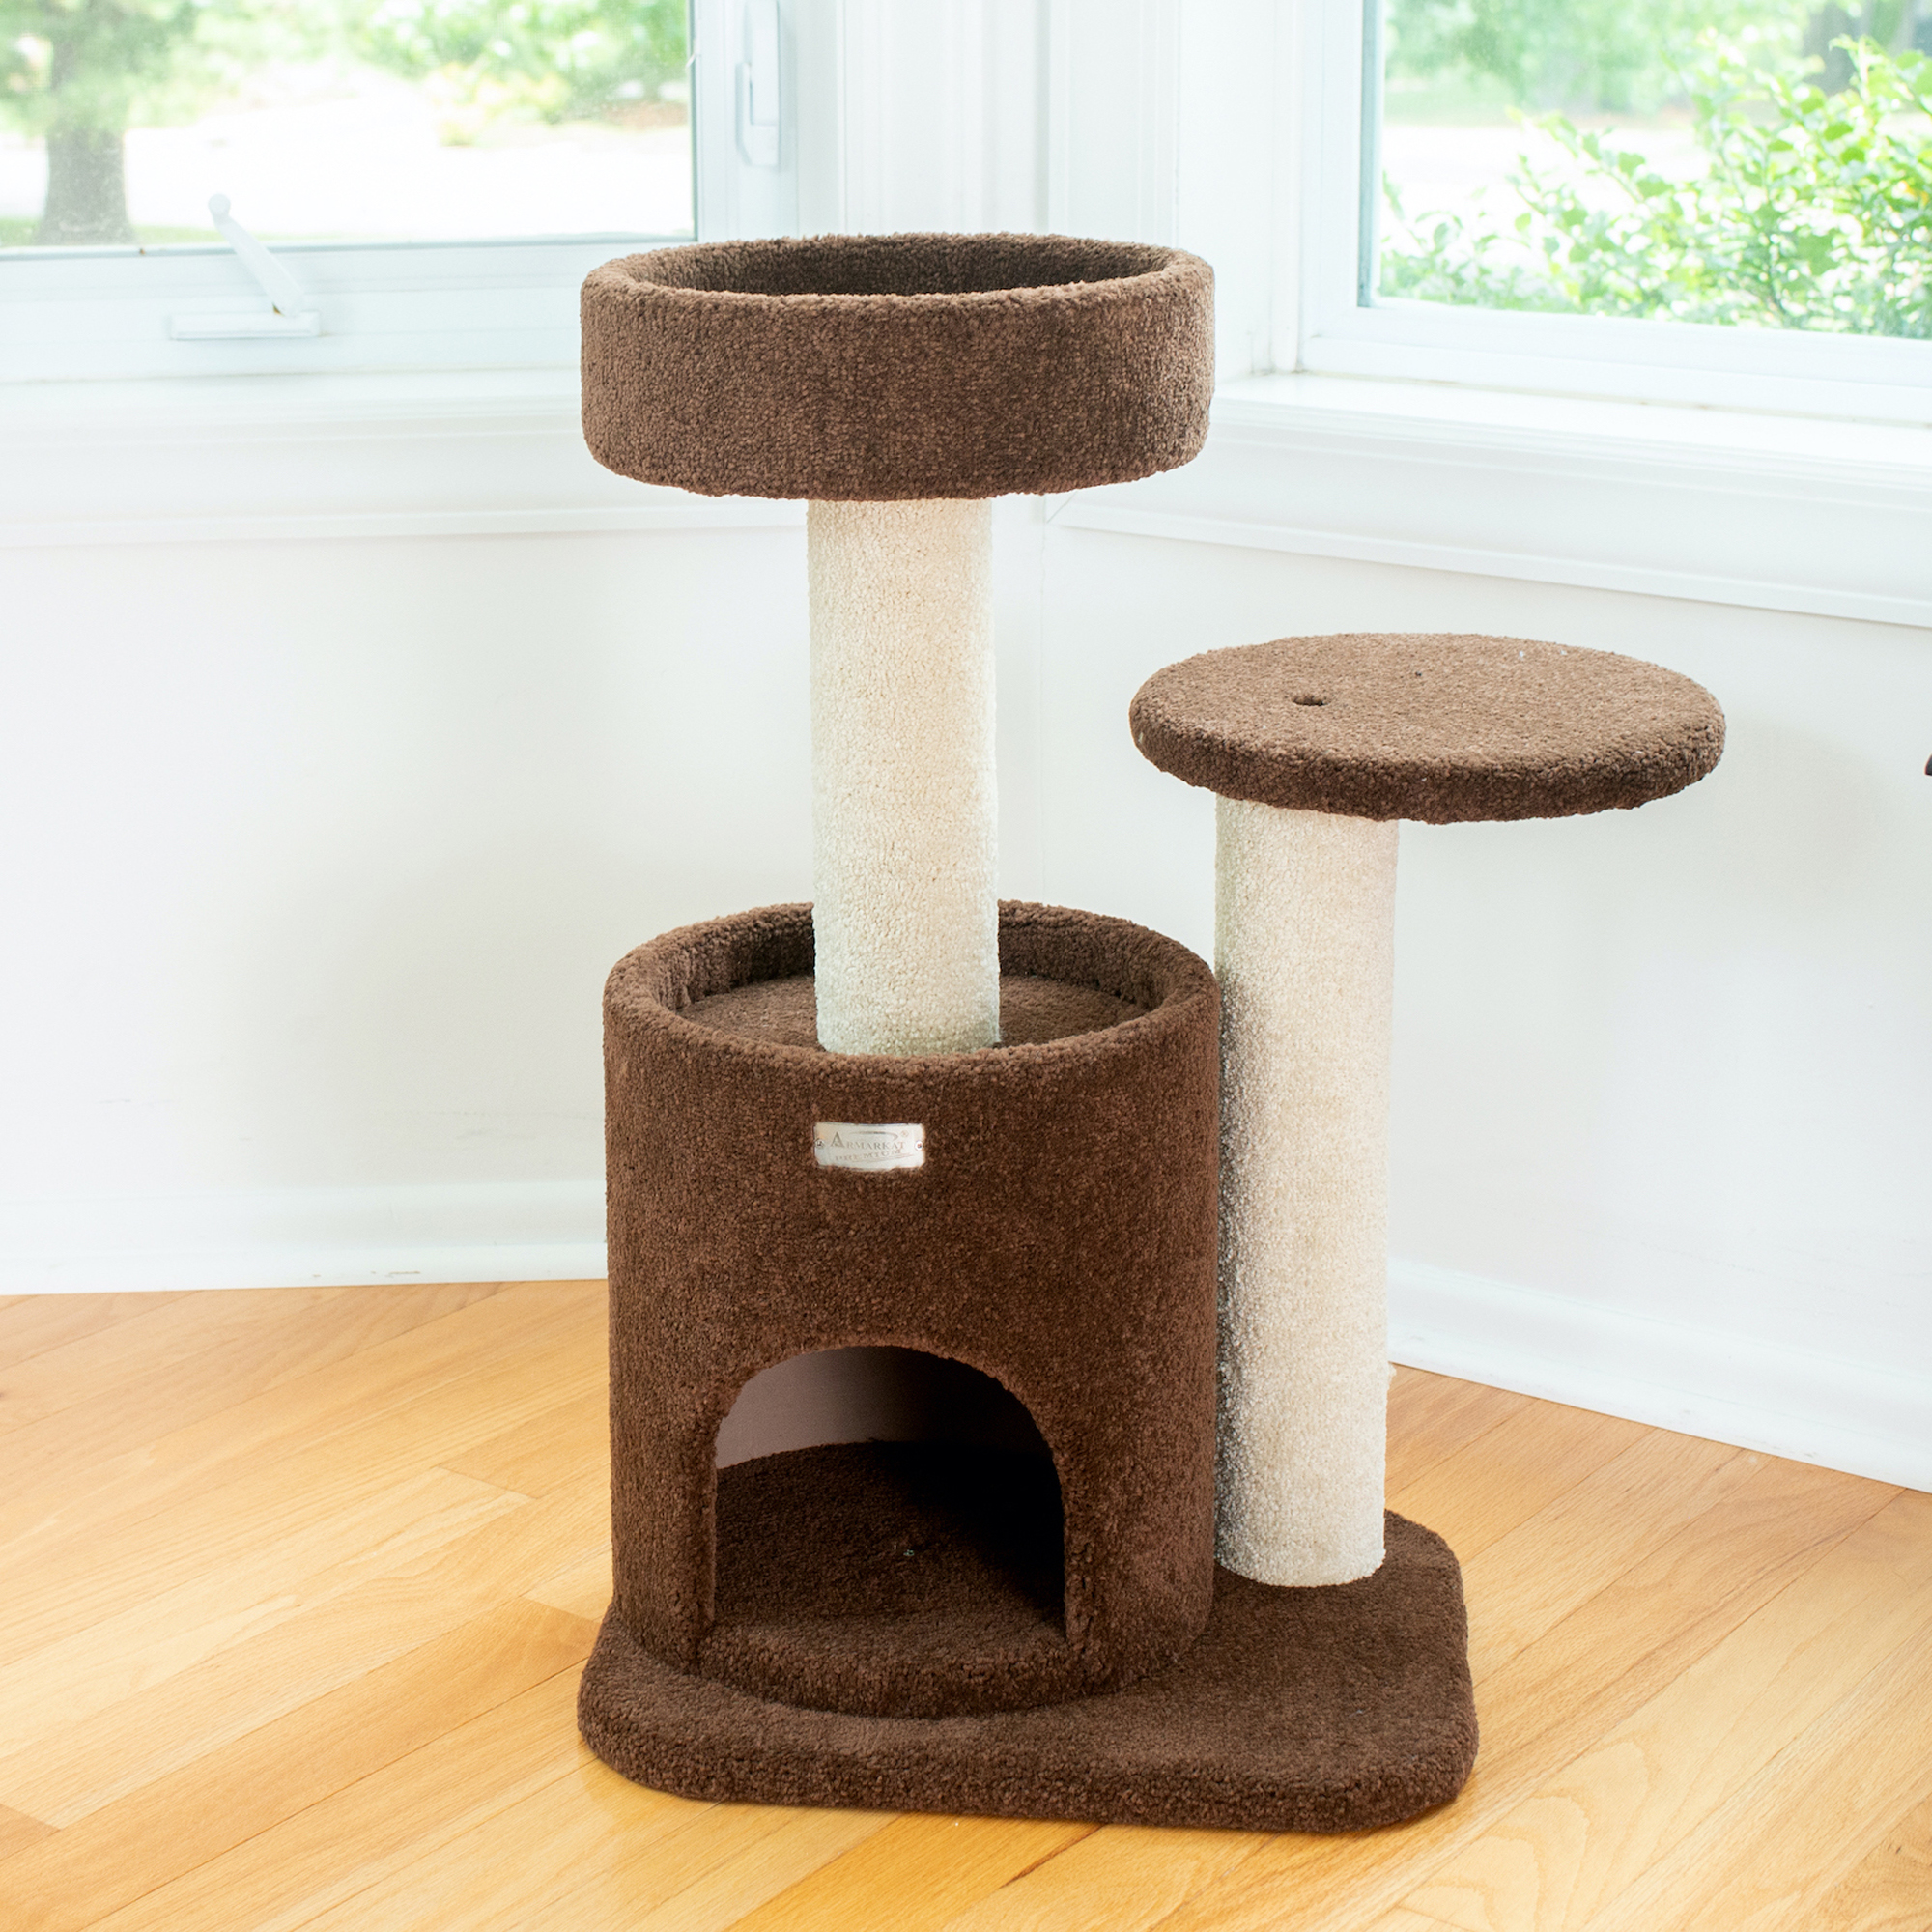 2013 New Design Armarkat Carpeted Cat Tree Gym Scratching Post Coffee Brown 30 Inch